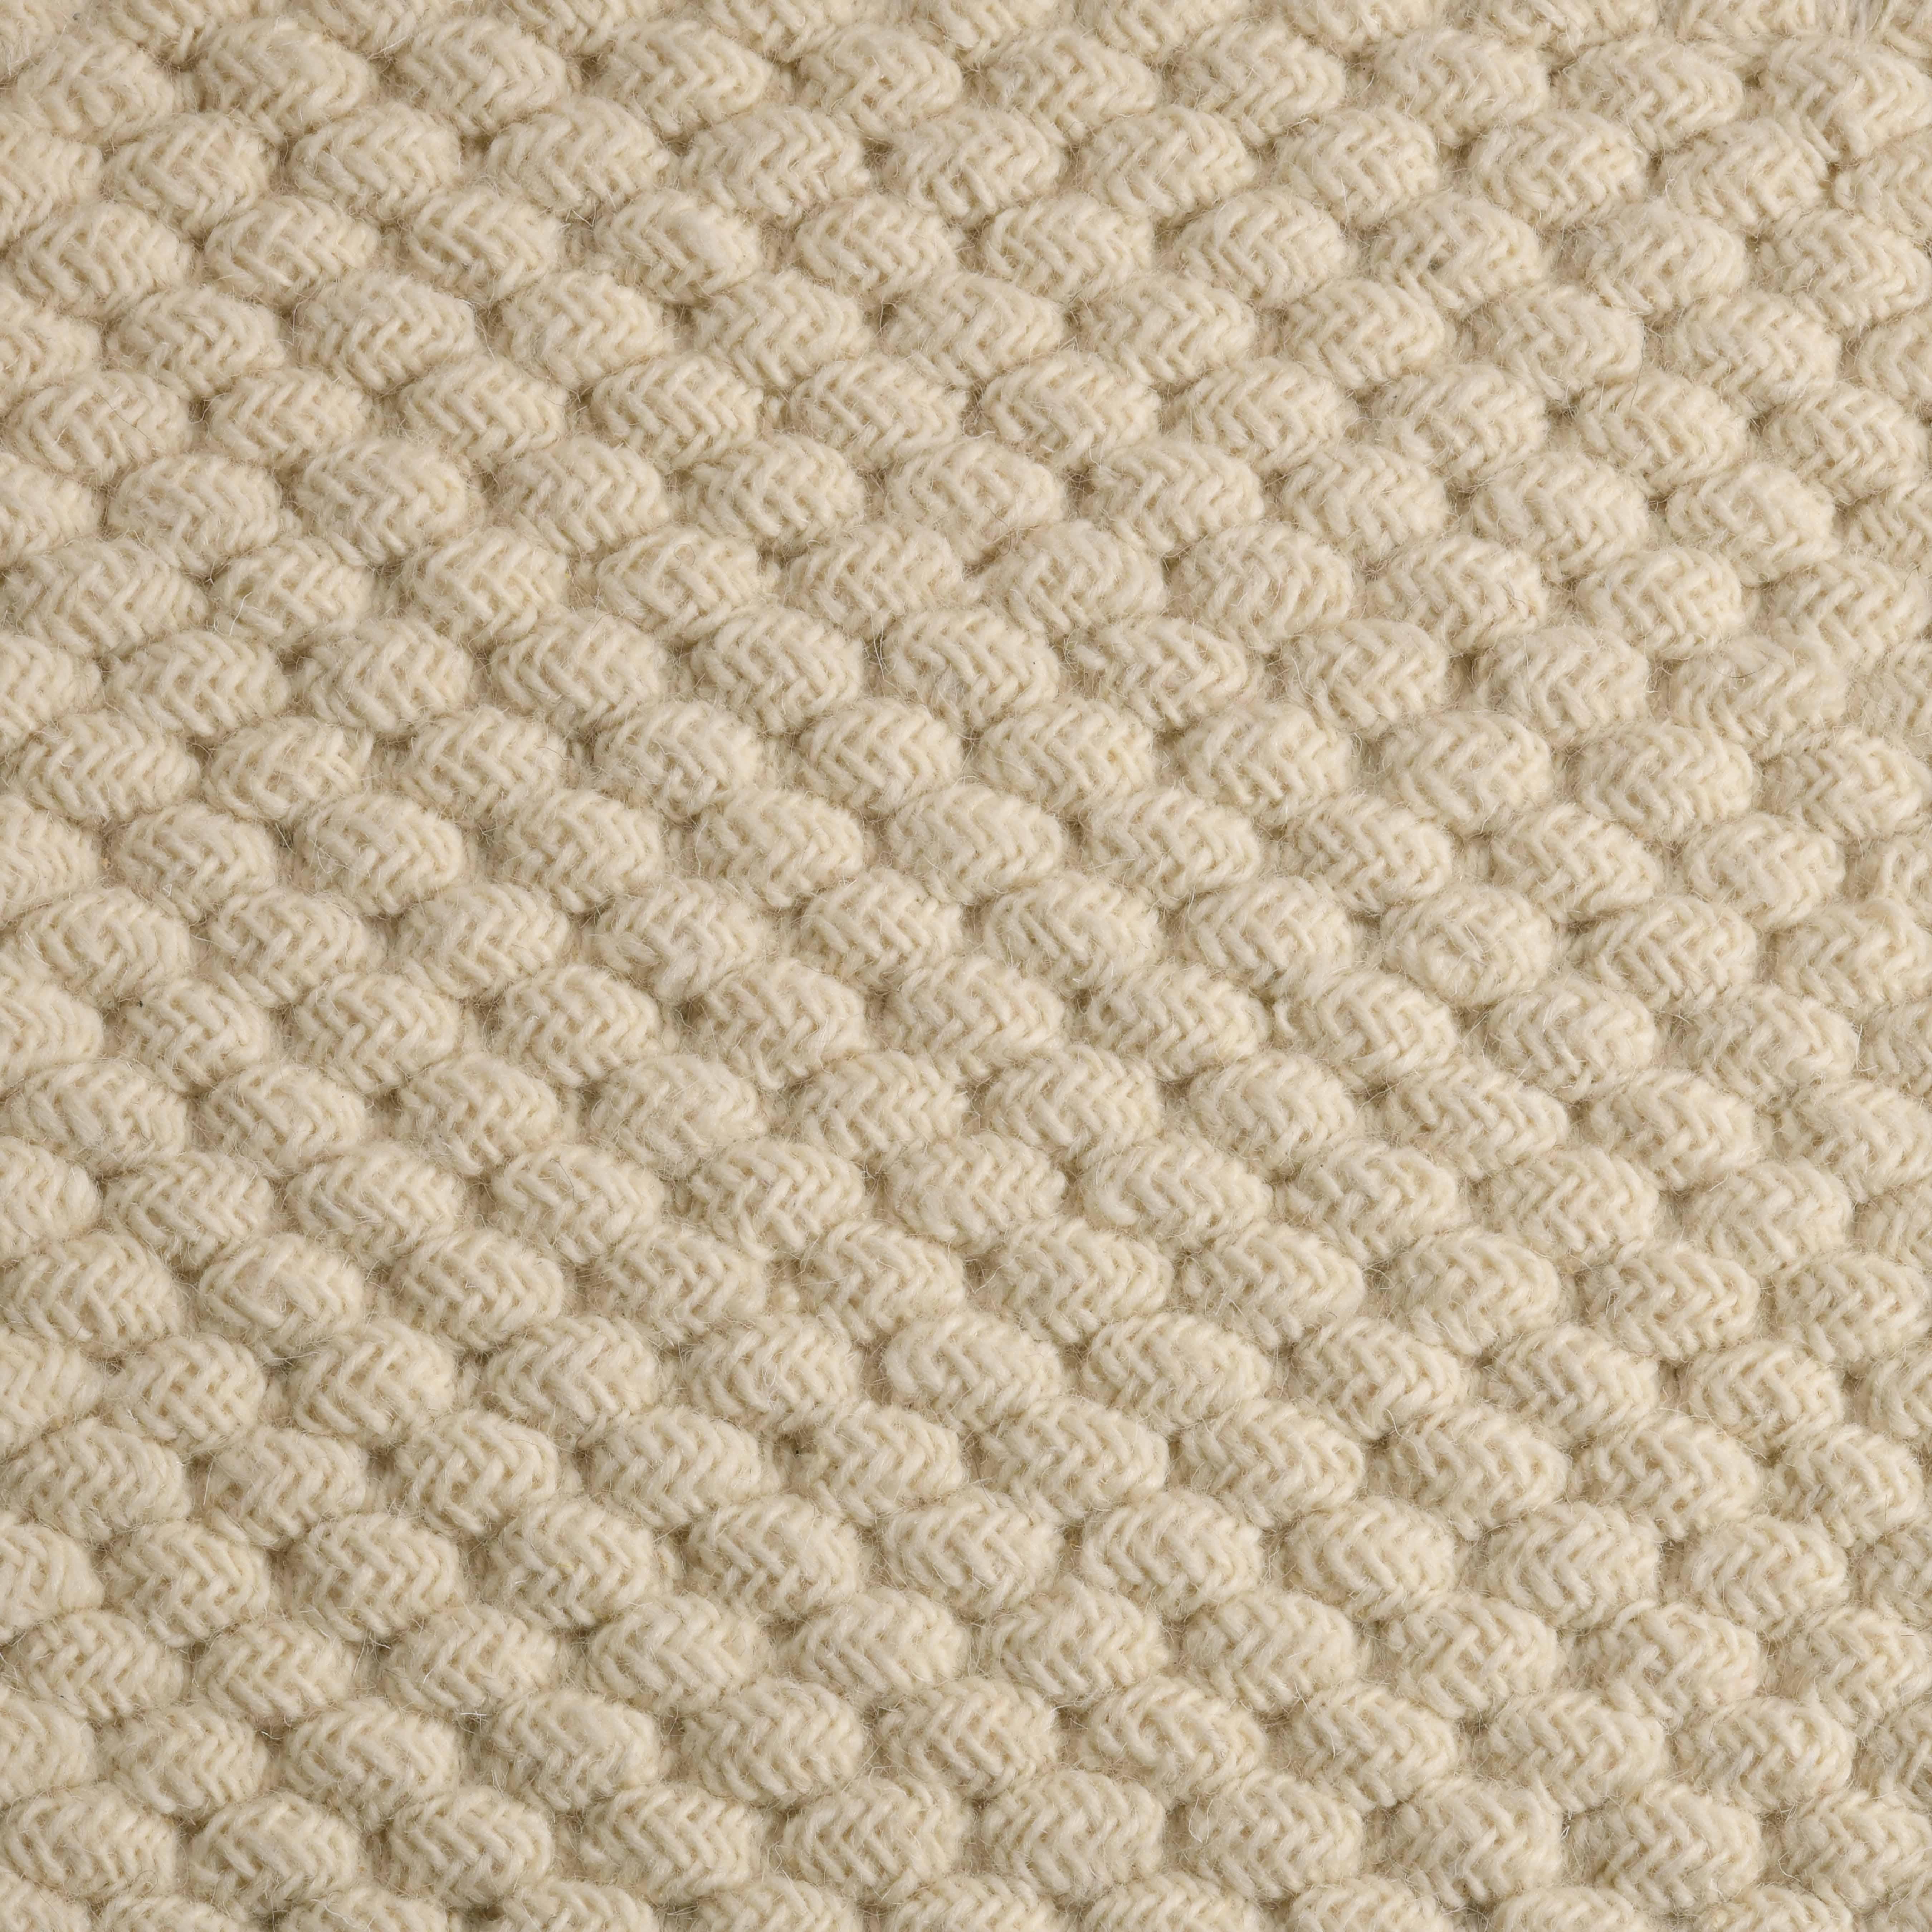 Acia, Ivory, Handwoven Face: 60% Undyed NZ Wool, 40% Undyed MED Wool, 6' x 9' For Sale